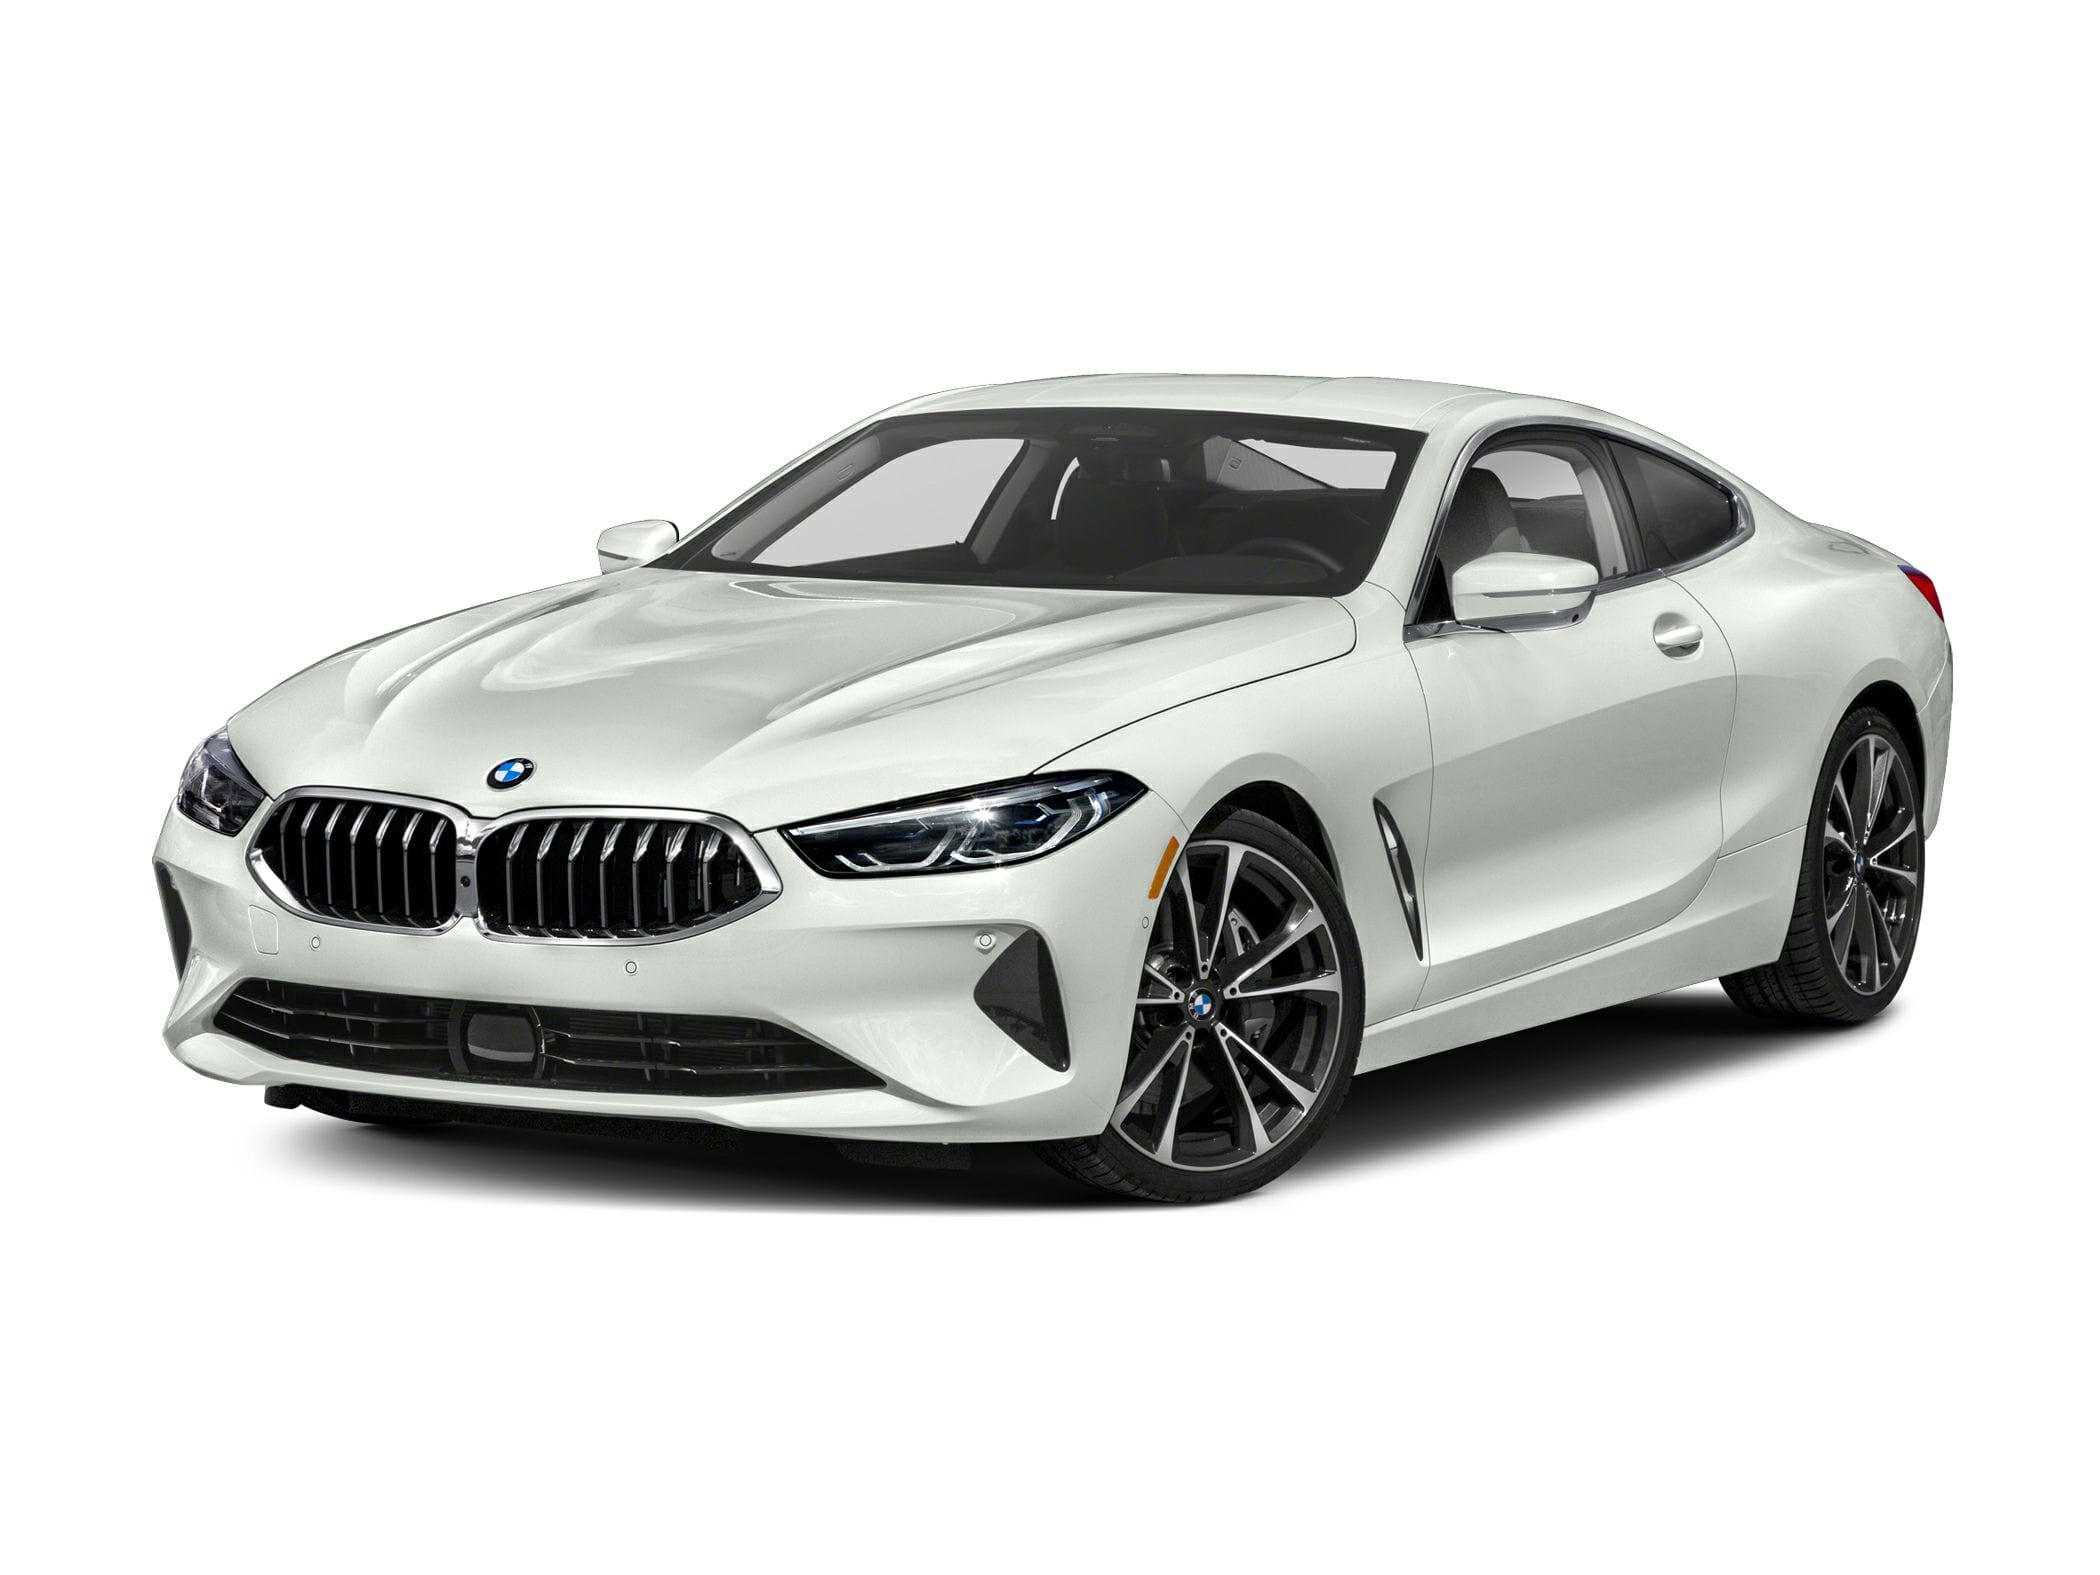 2021 BMW 8-Series 840i Gran Coupe Base 4dr Rear-wheel Drive Sedan Lease  1278 Mo 3000 Down Available